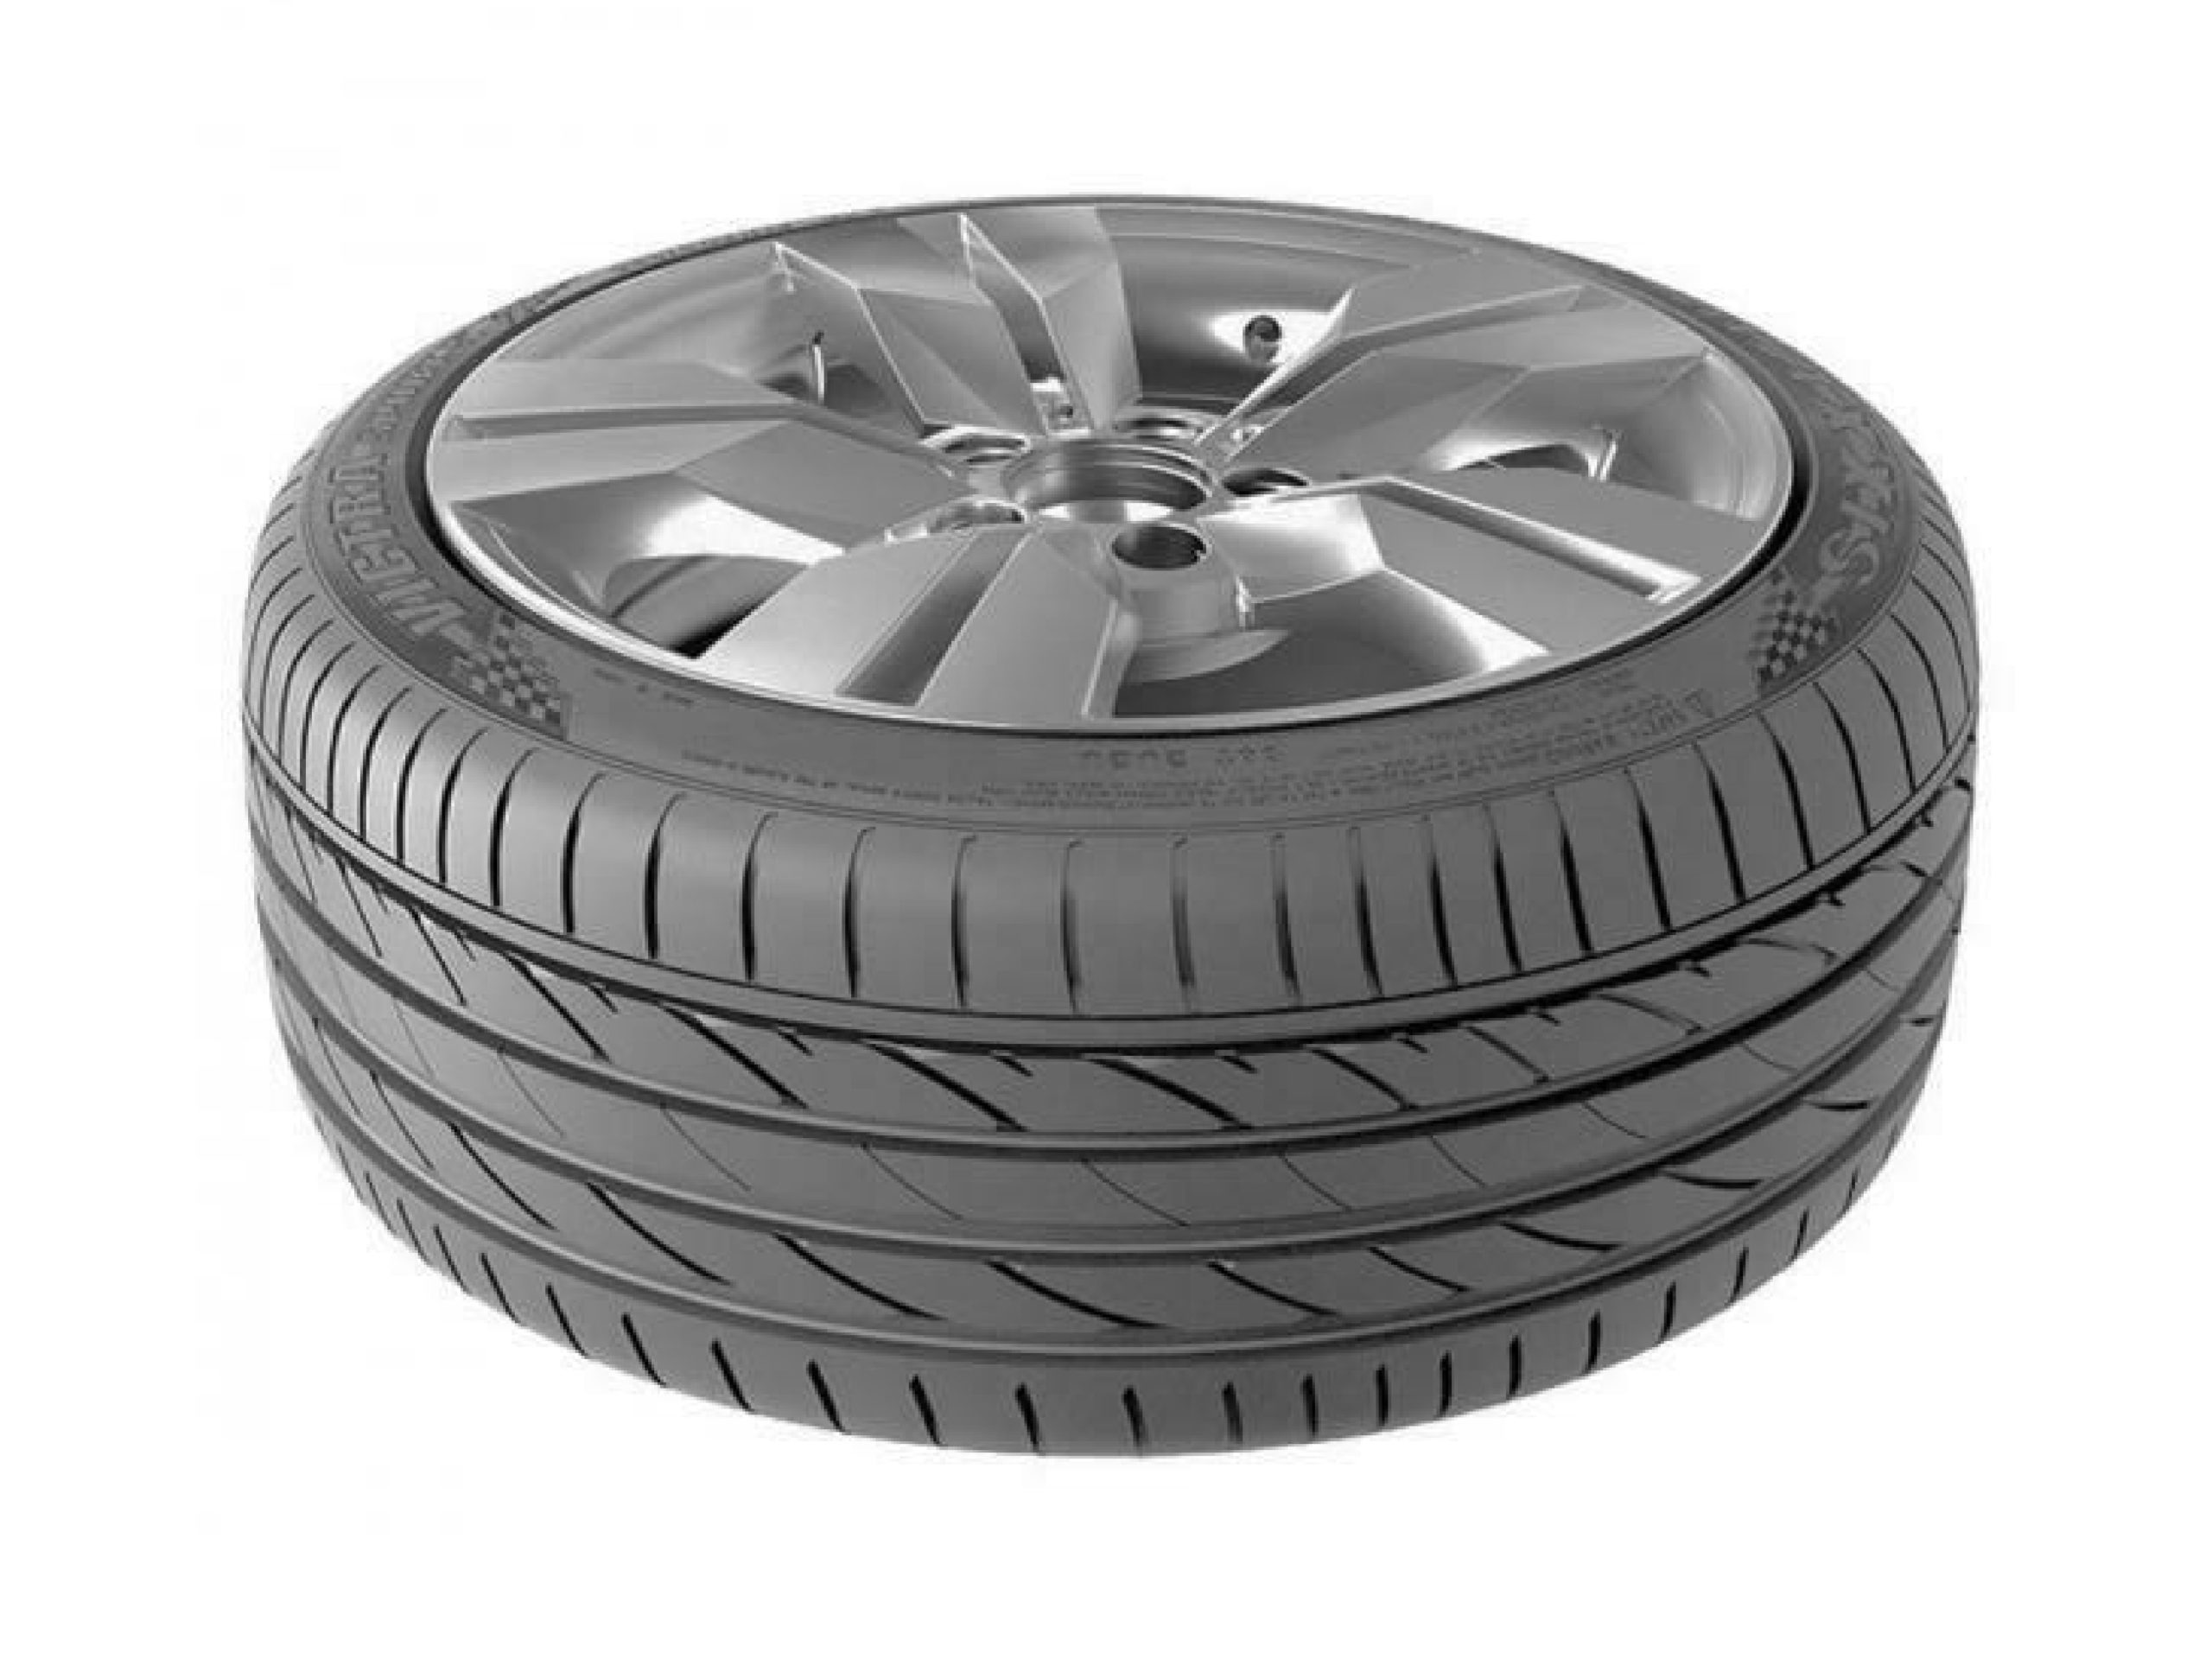 Резина maxxis victra sport. Maxxis Victra Sport 5. Maxxis vs5 SUV Victra Sport 5. Шины Maxxis Victra Sport 5. Maxxis Victra Sport 5 19.